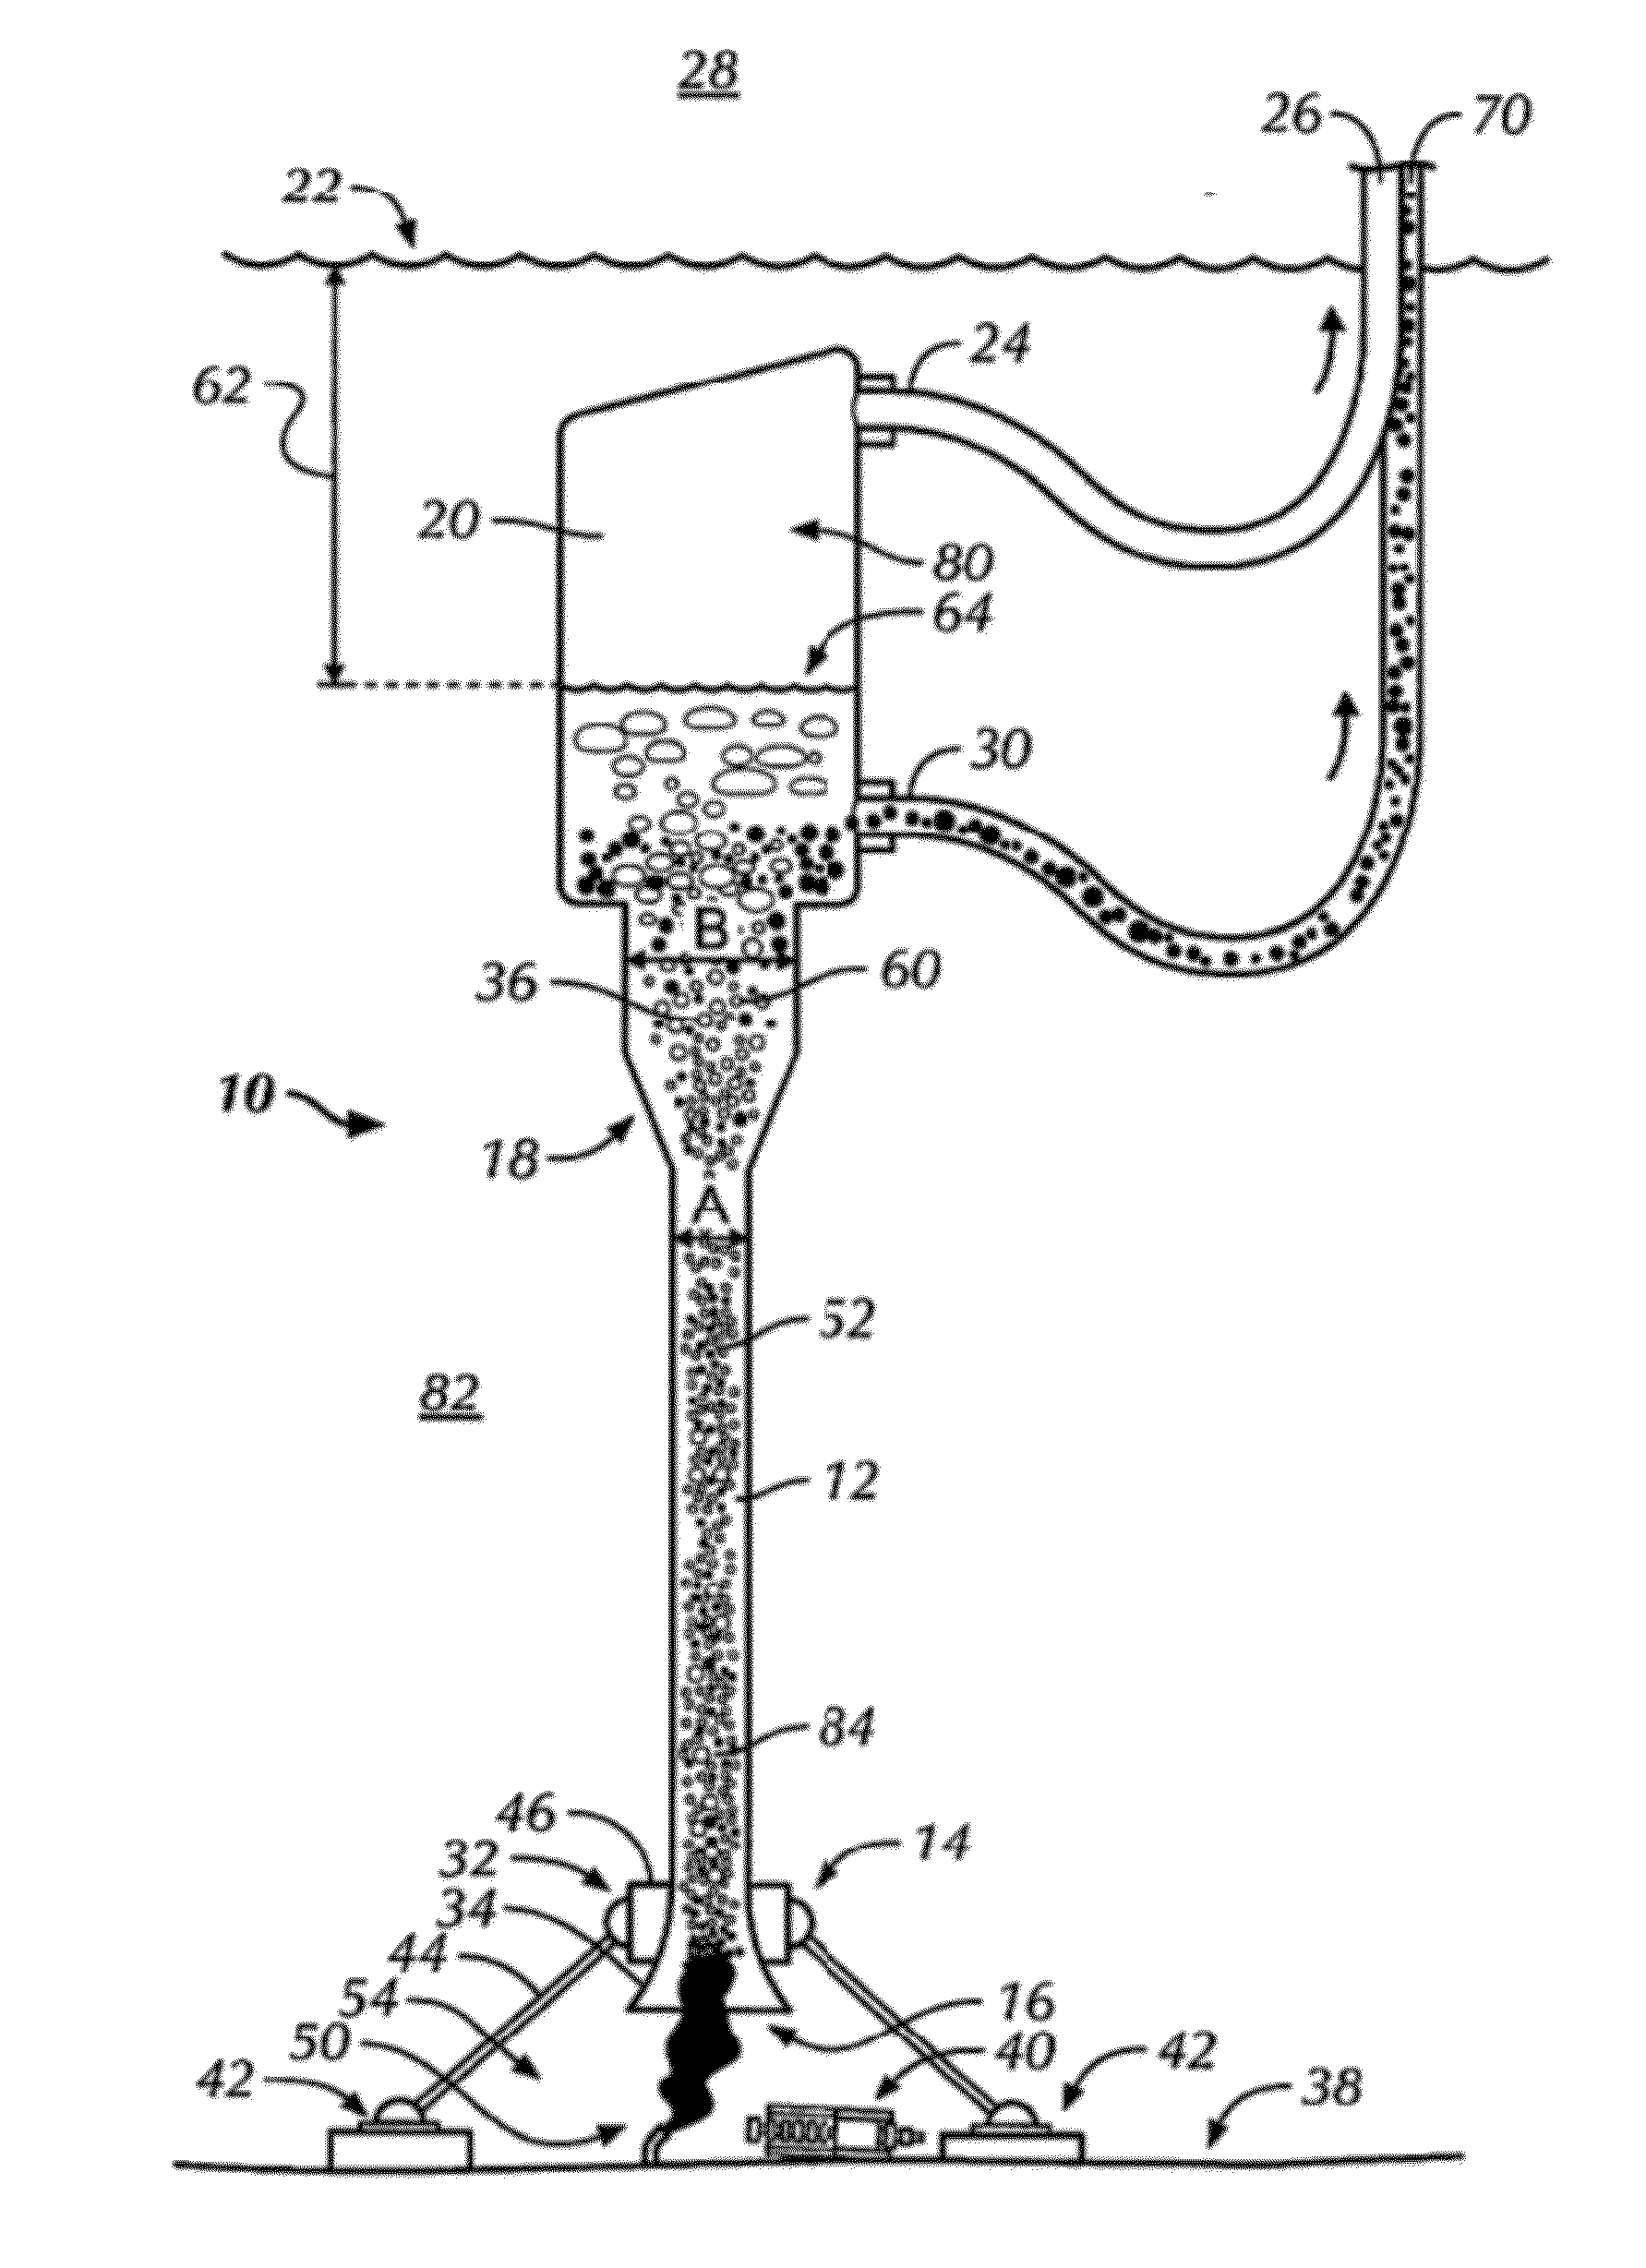 Universal Subsea Oil Containment System and Method